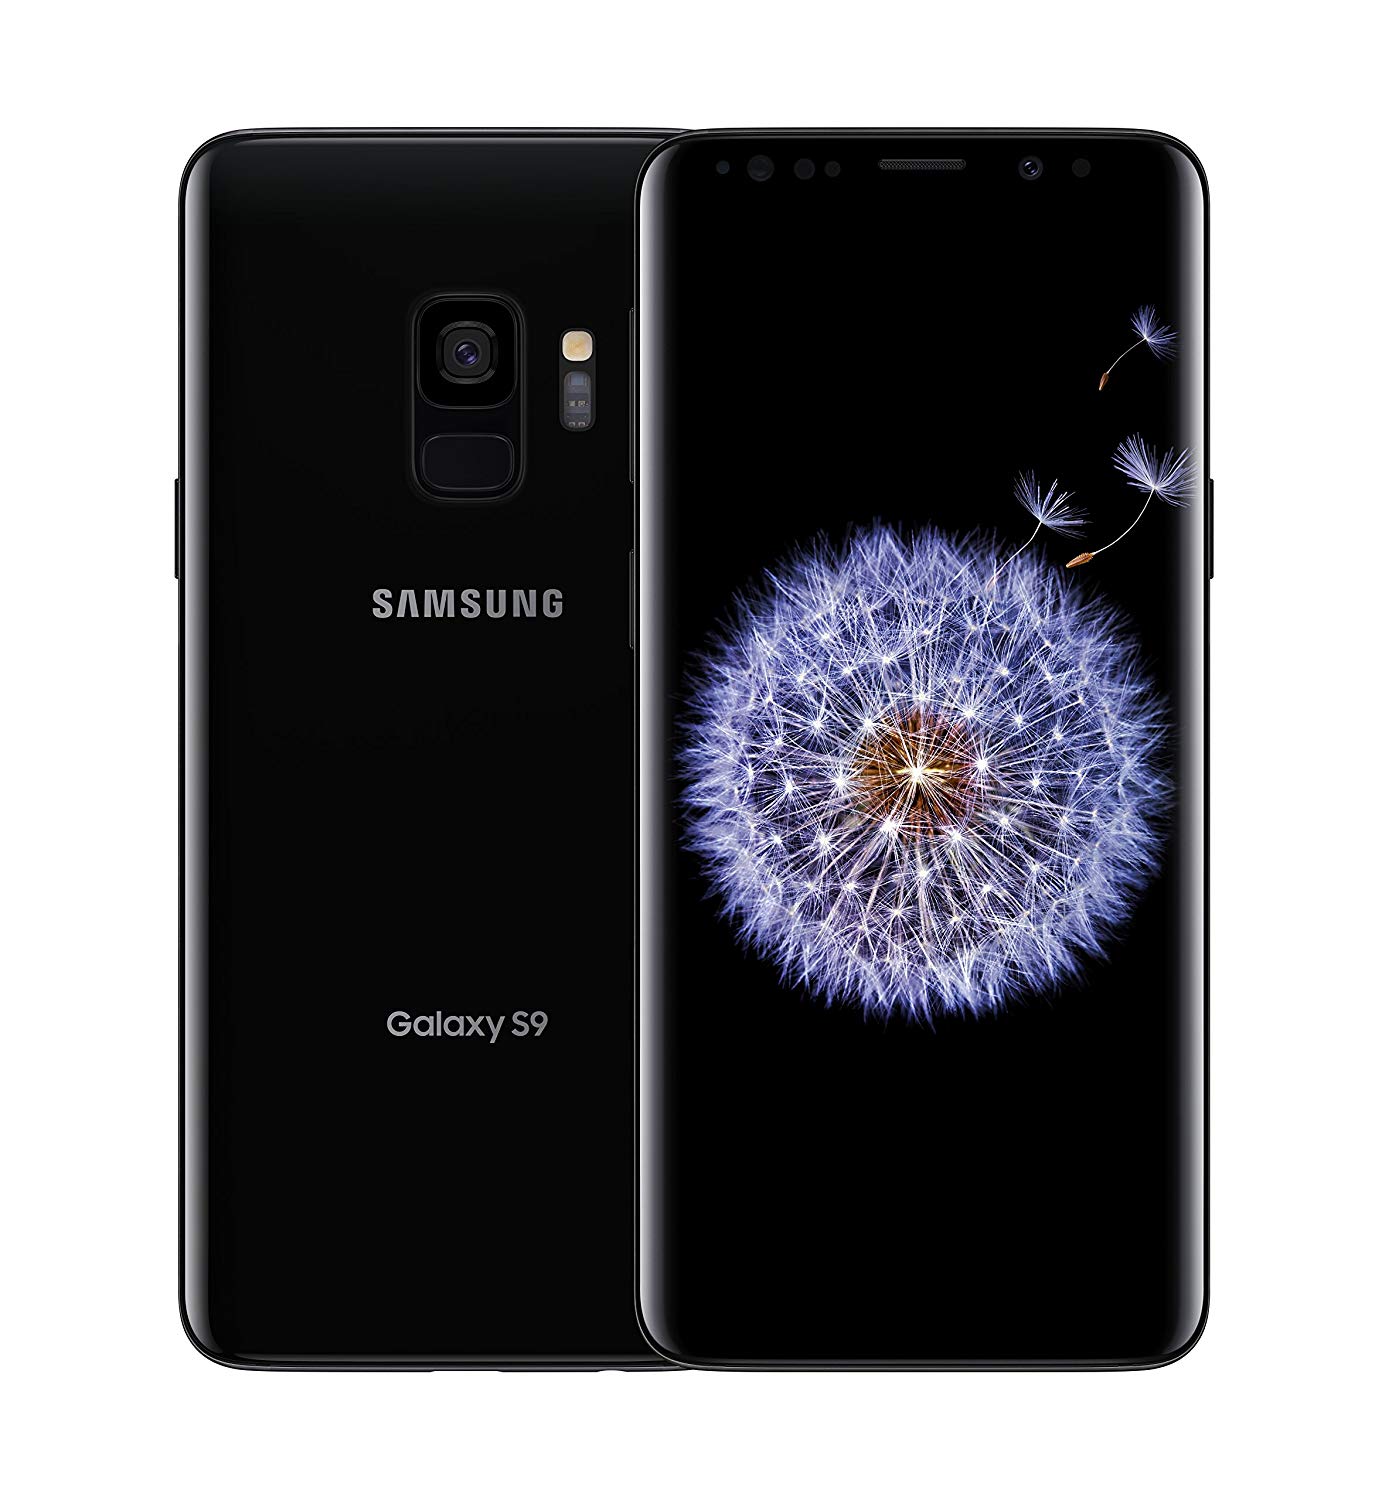 Verizon editions of Samsung Galaxy S9 and S9 Plus now support RCS messaging